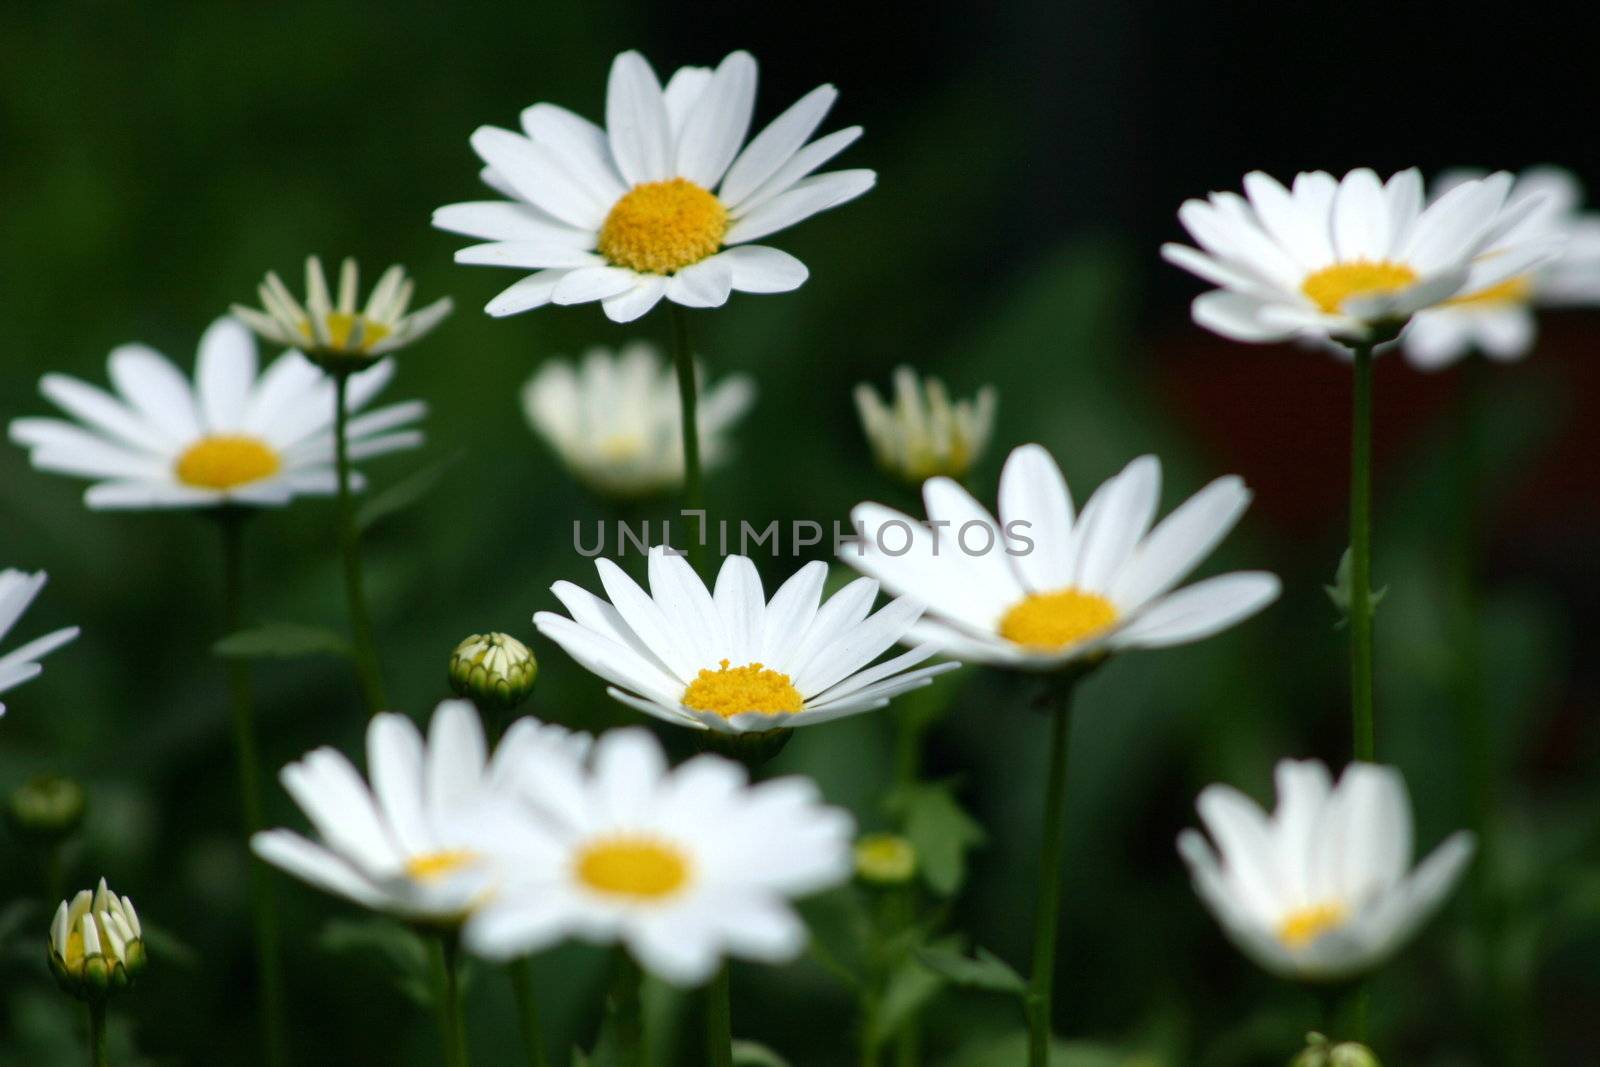 daisies growing closely together